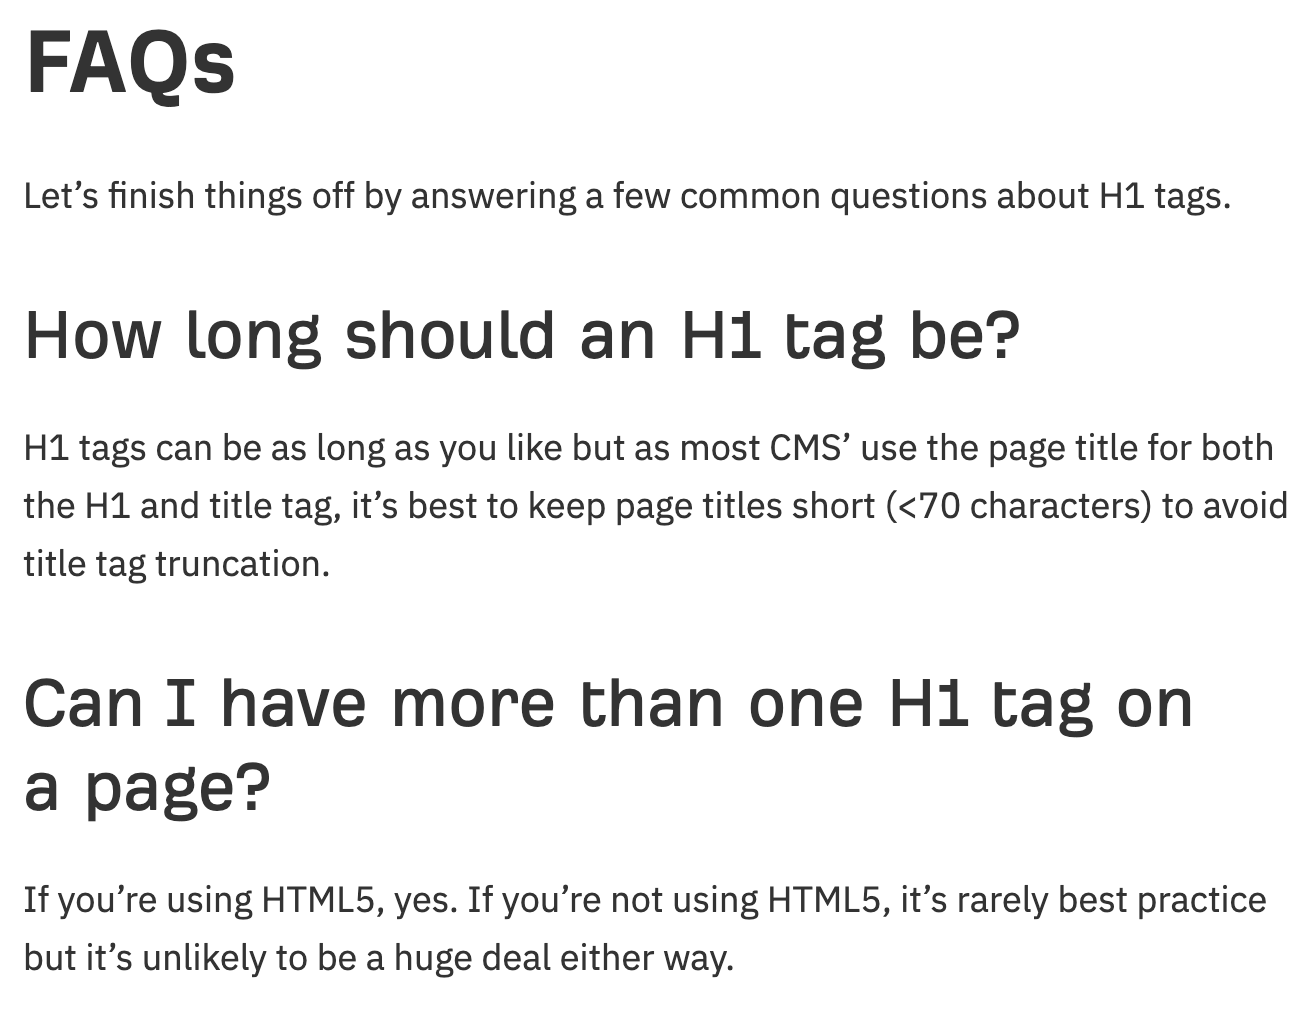 FAQs section in our guide to H1 tags